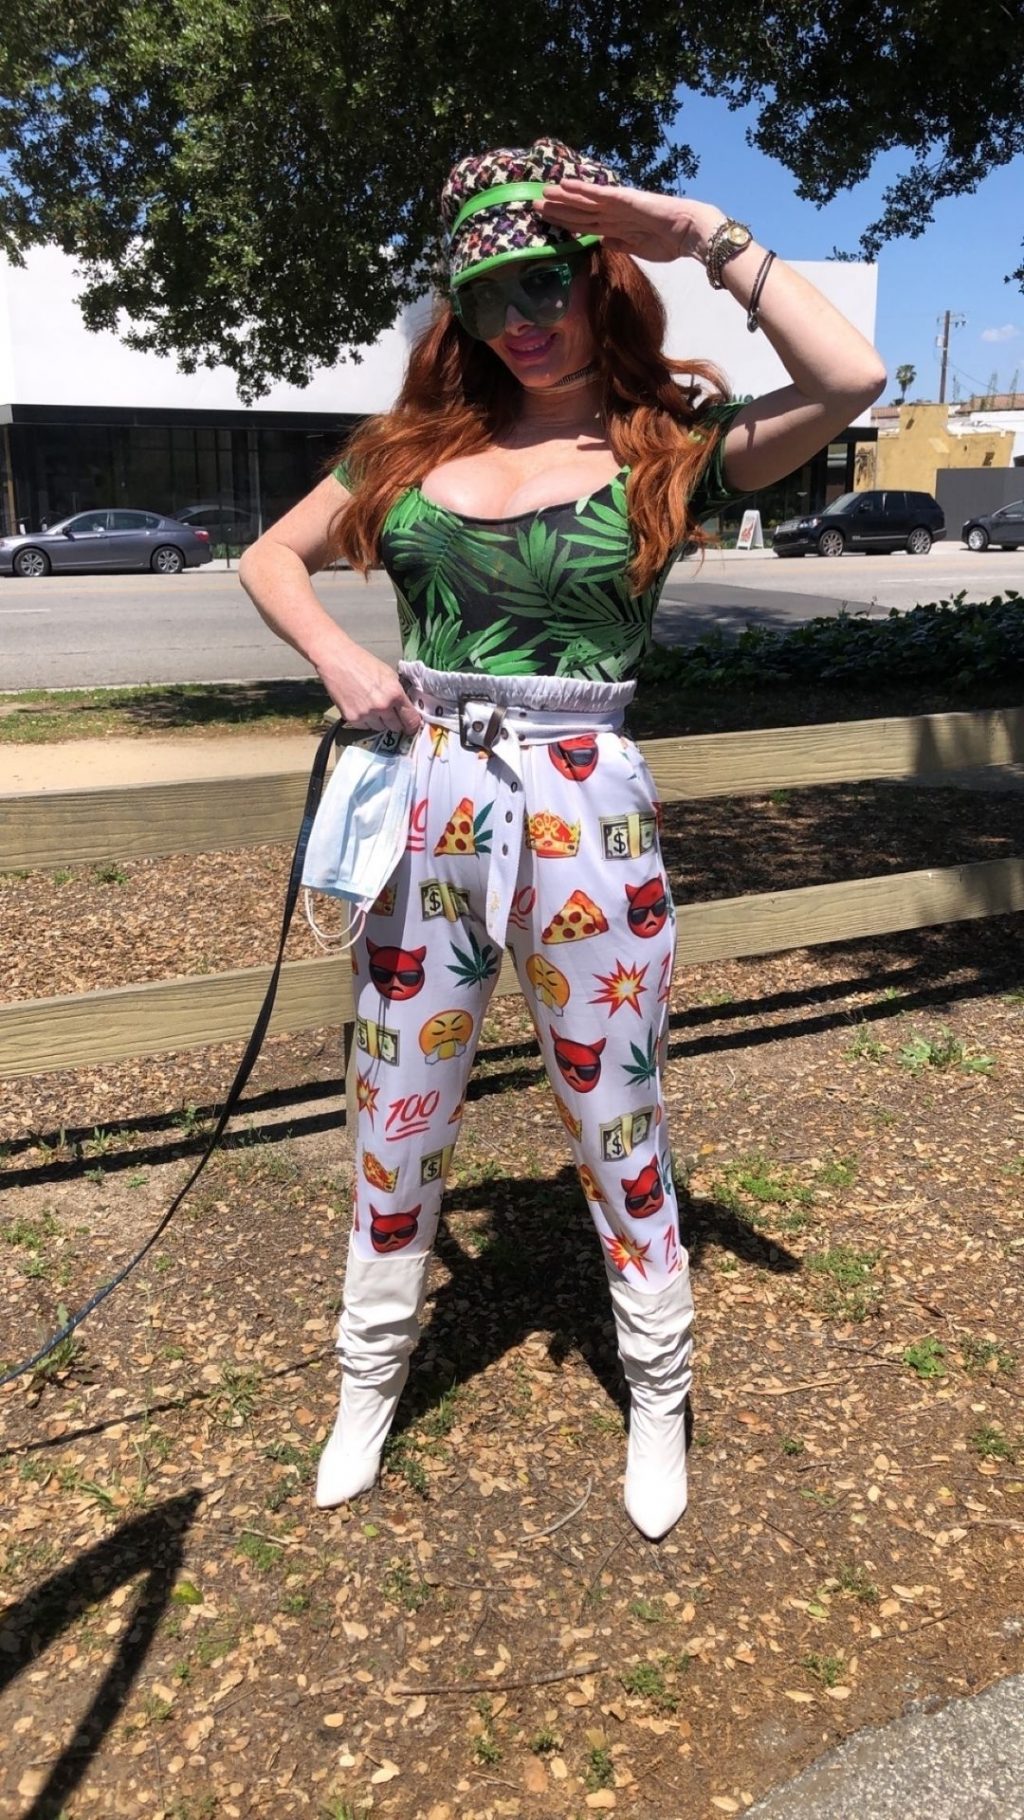 Phoebe Price Has a Collection of COVID-19 Personalized Masks (20 Photos)